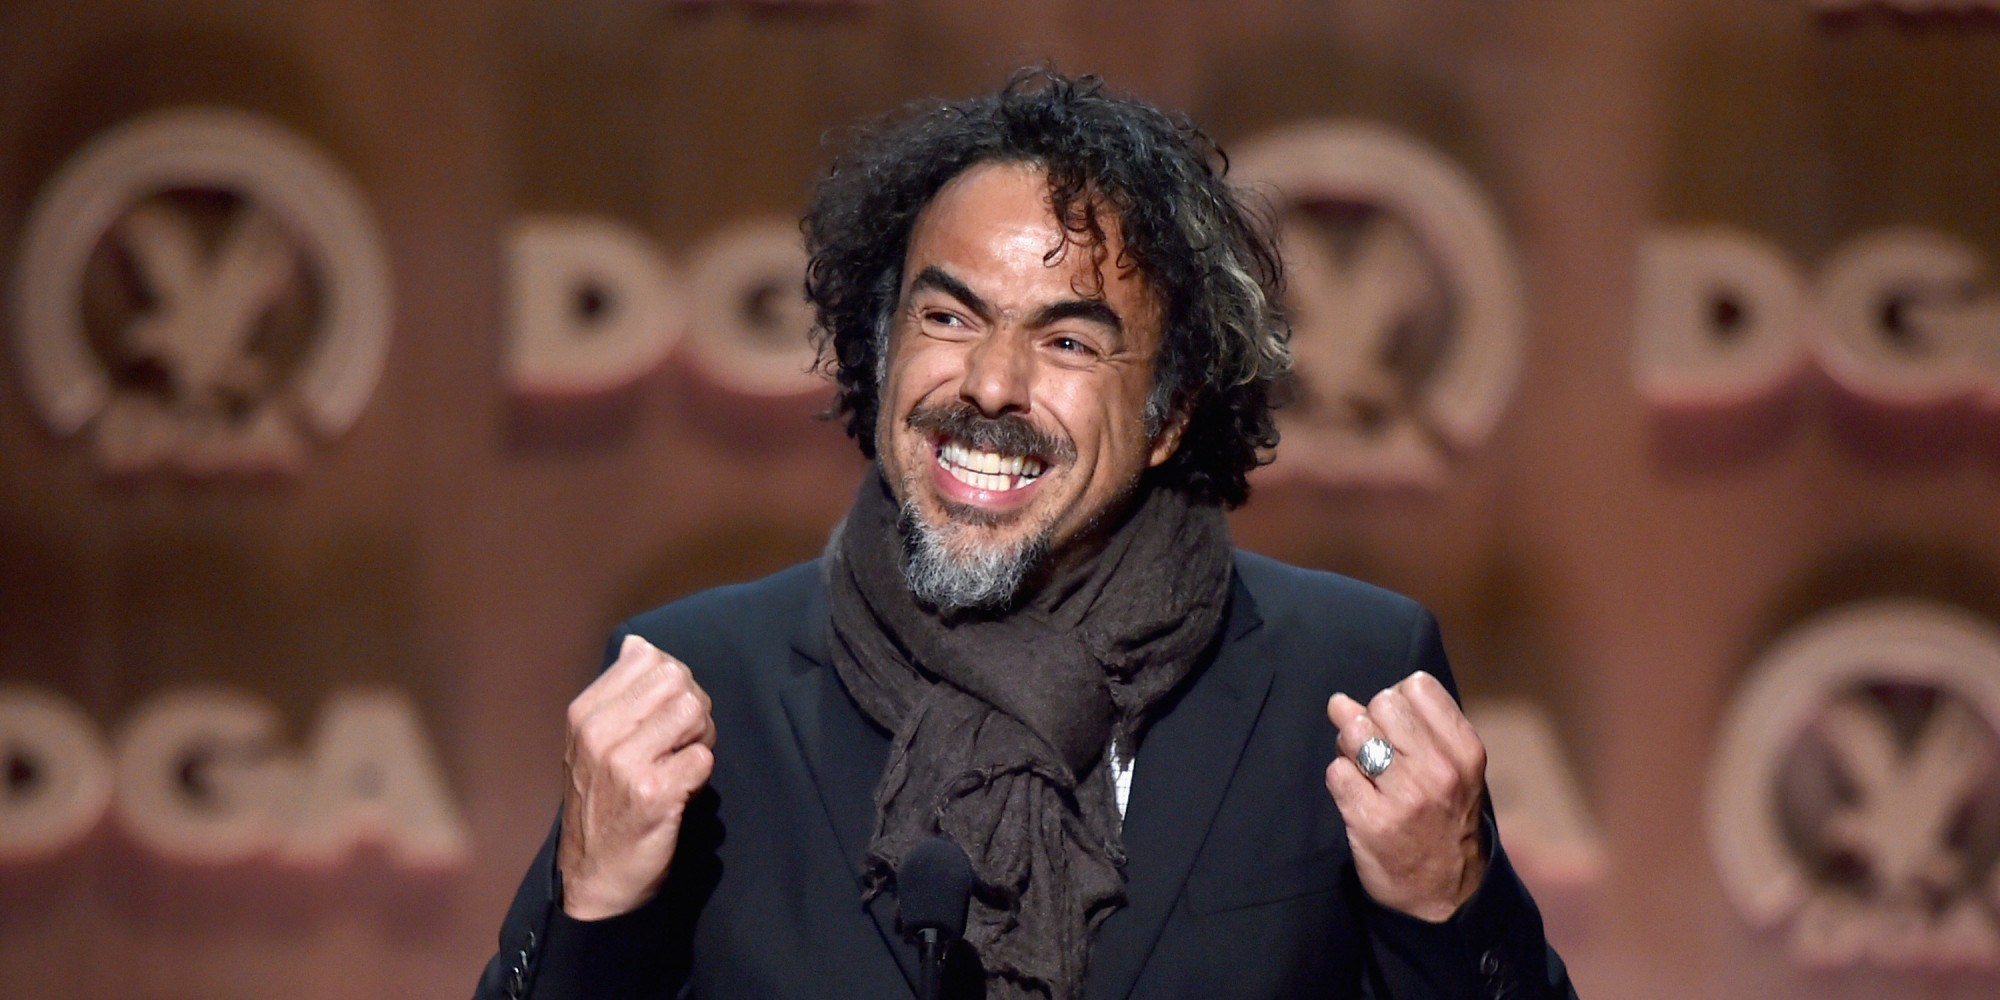 CENTURY CITY, CA - FEBRUARY 07:   Director Alejandro Gonzalez Inarritu accepts the Feature Film Nomination Plaque for 'Birdman or (The Unexpected Virtue of Ignorance)'onstage at the 67th Annual Directors Guild Of America Awards at the Hyatt Regency Century Plaza on February 7, 2015 in Century City, California.  (Photo by Alberto E. Rodriguez/Getty Images for DGA)